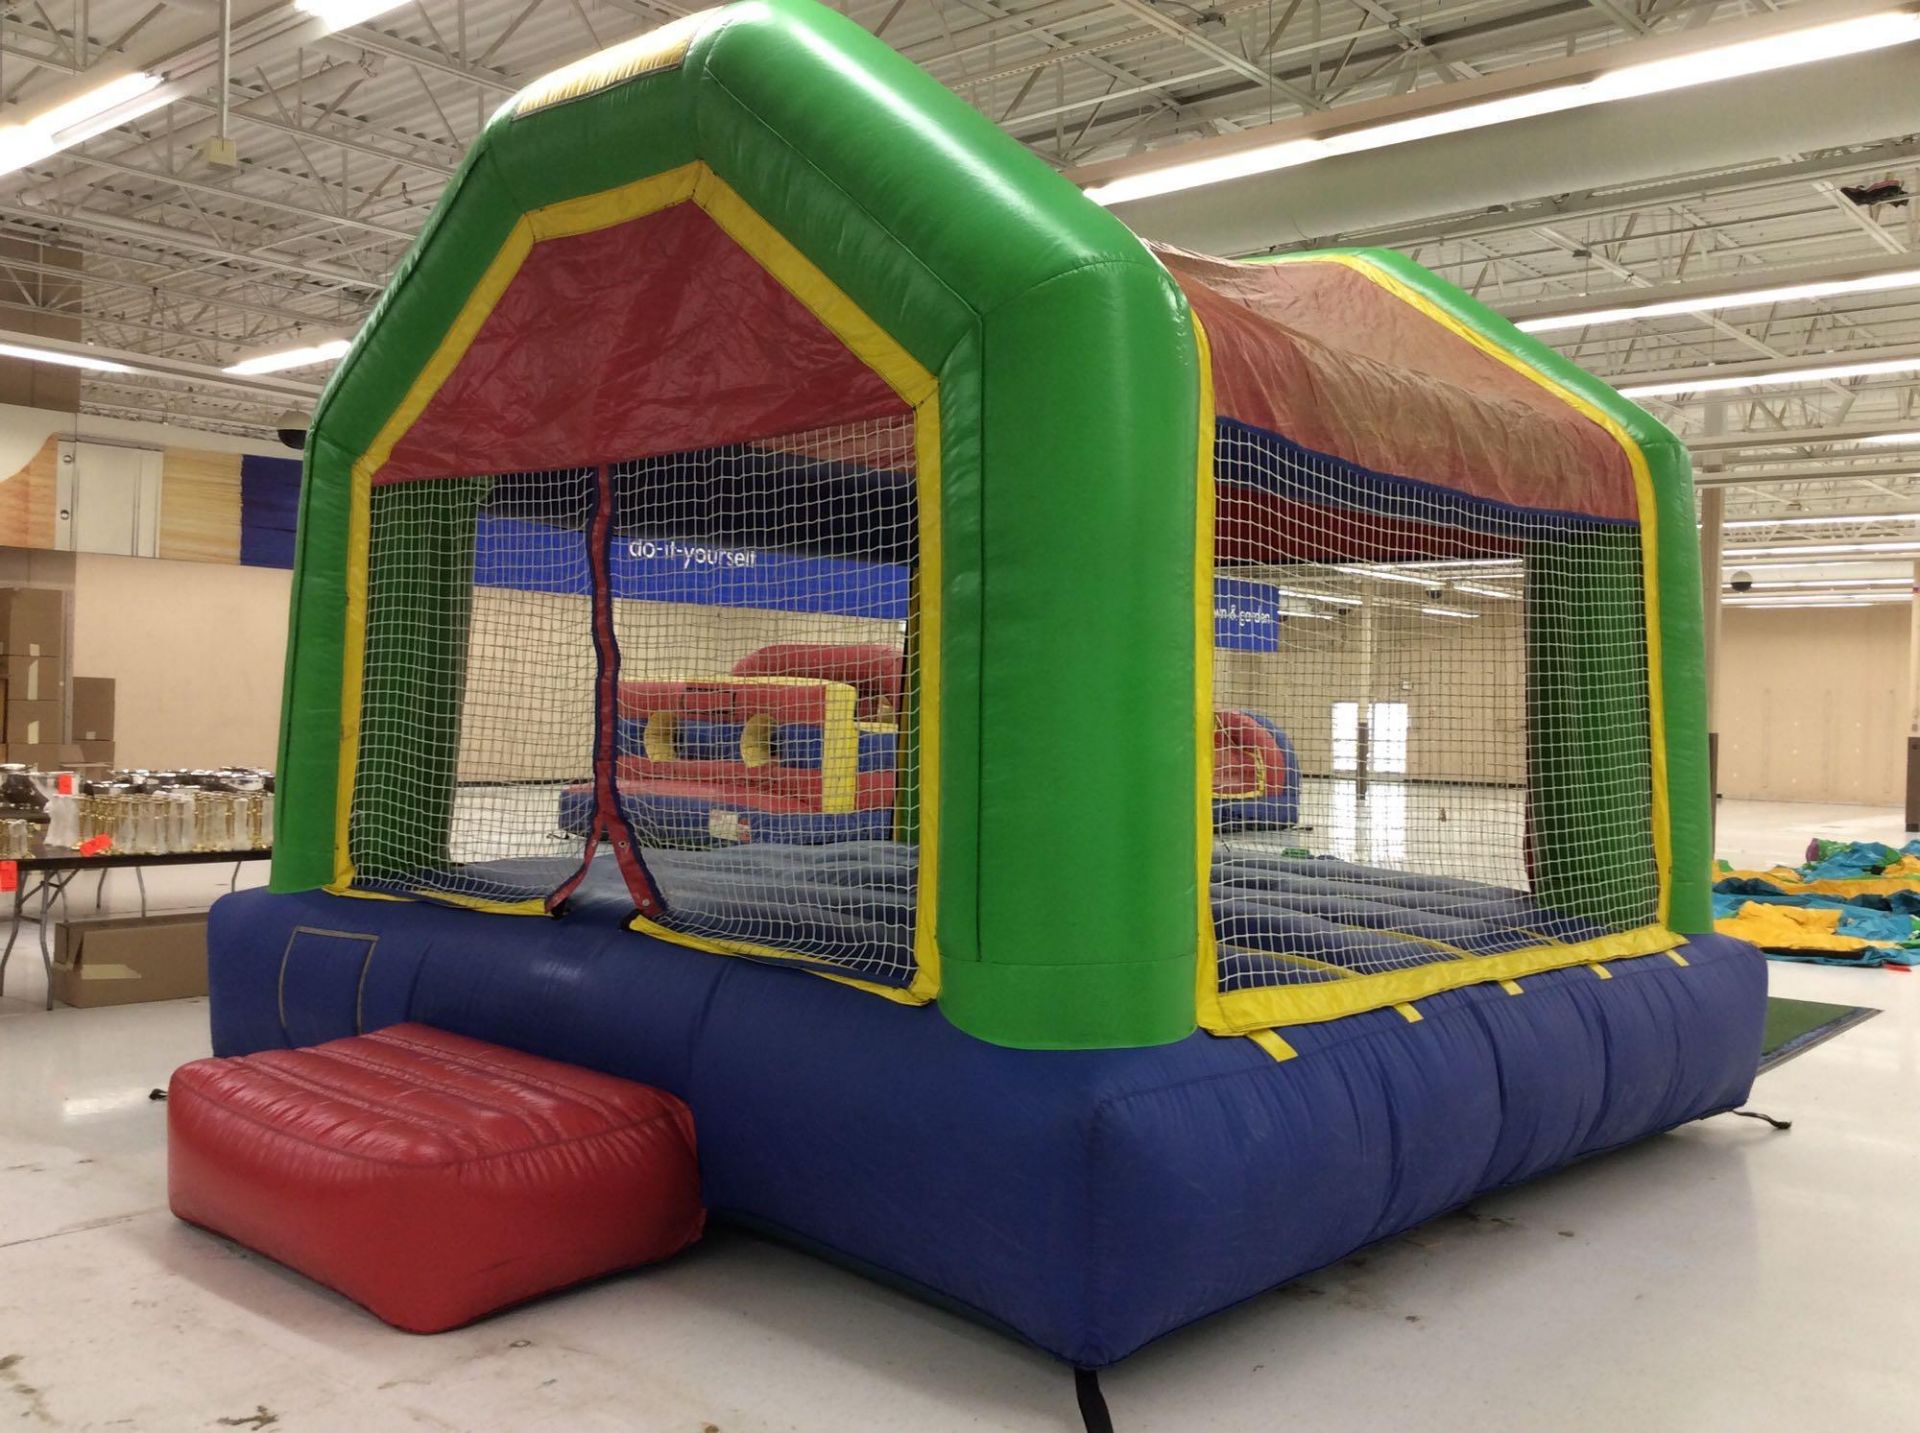 Funhouse inflatable bounce house, approx. 14' x 17', with blower - Image 2 of 3